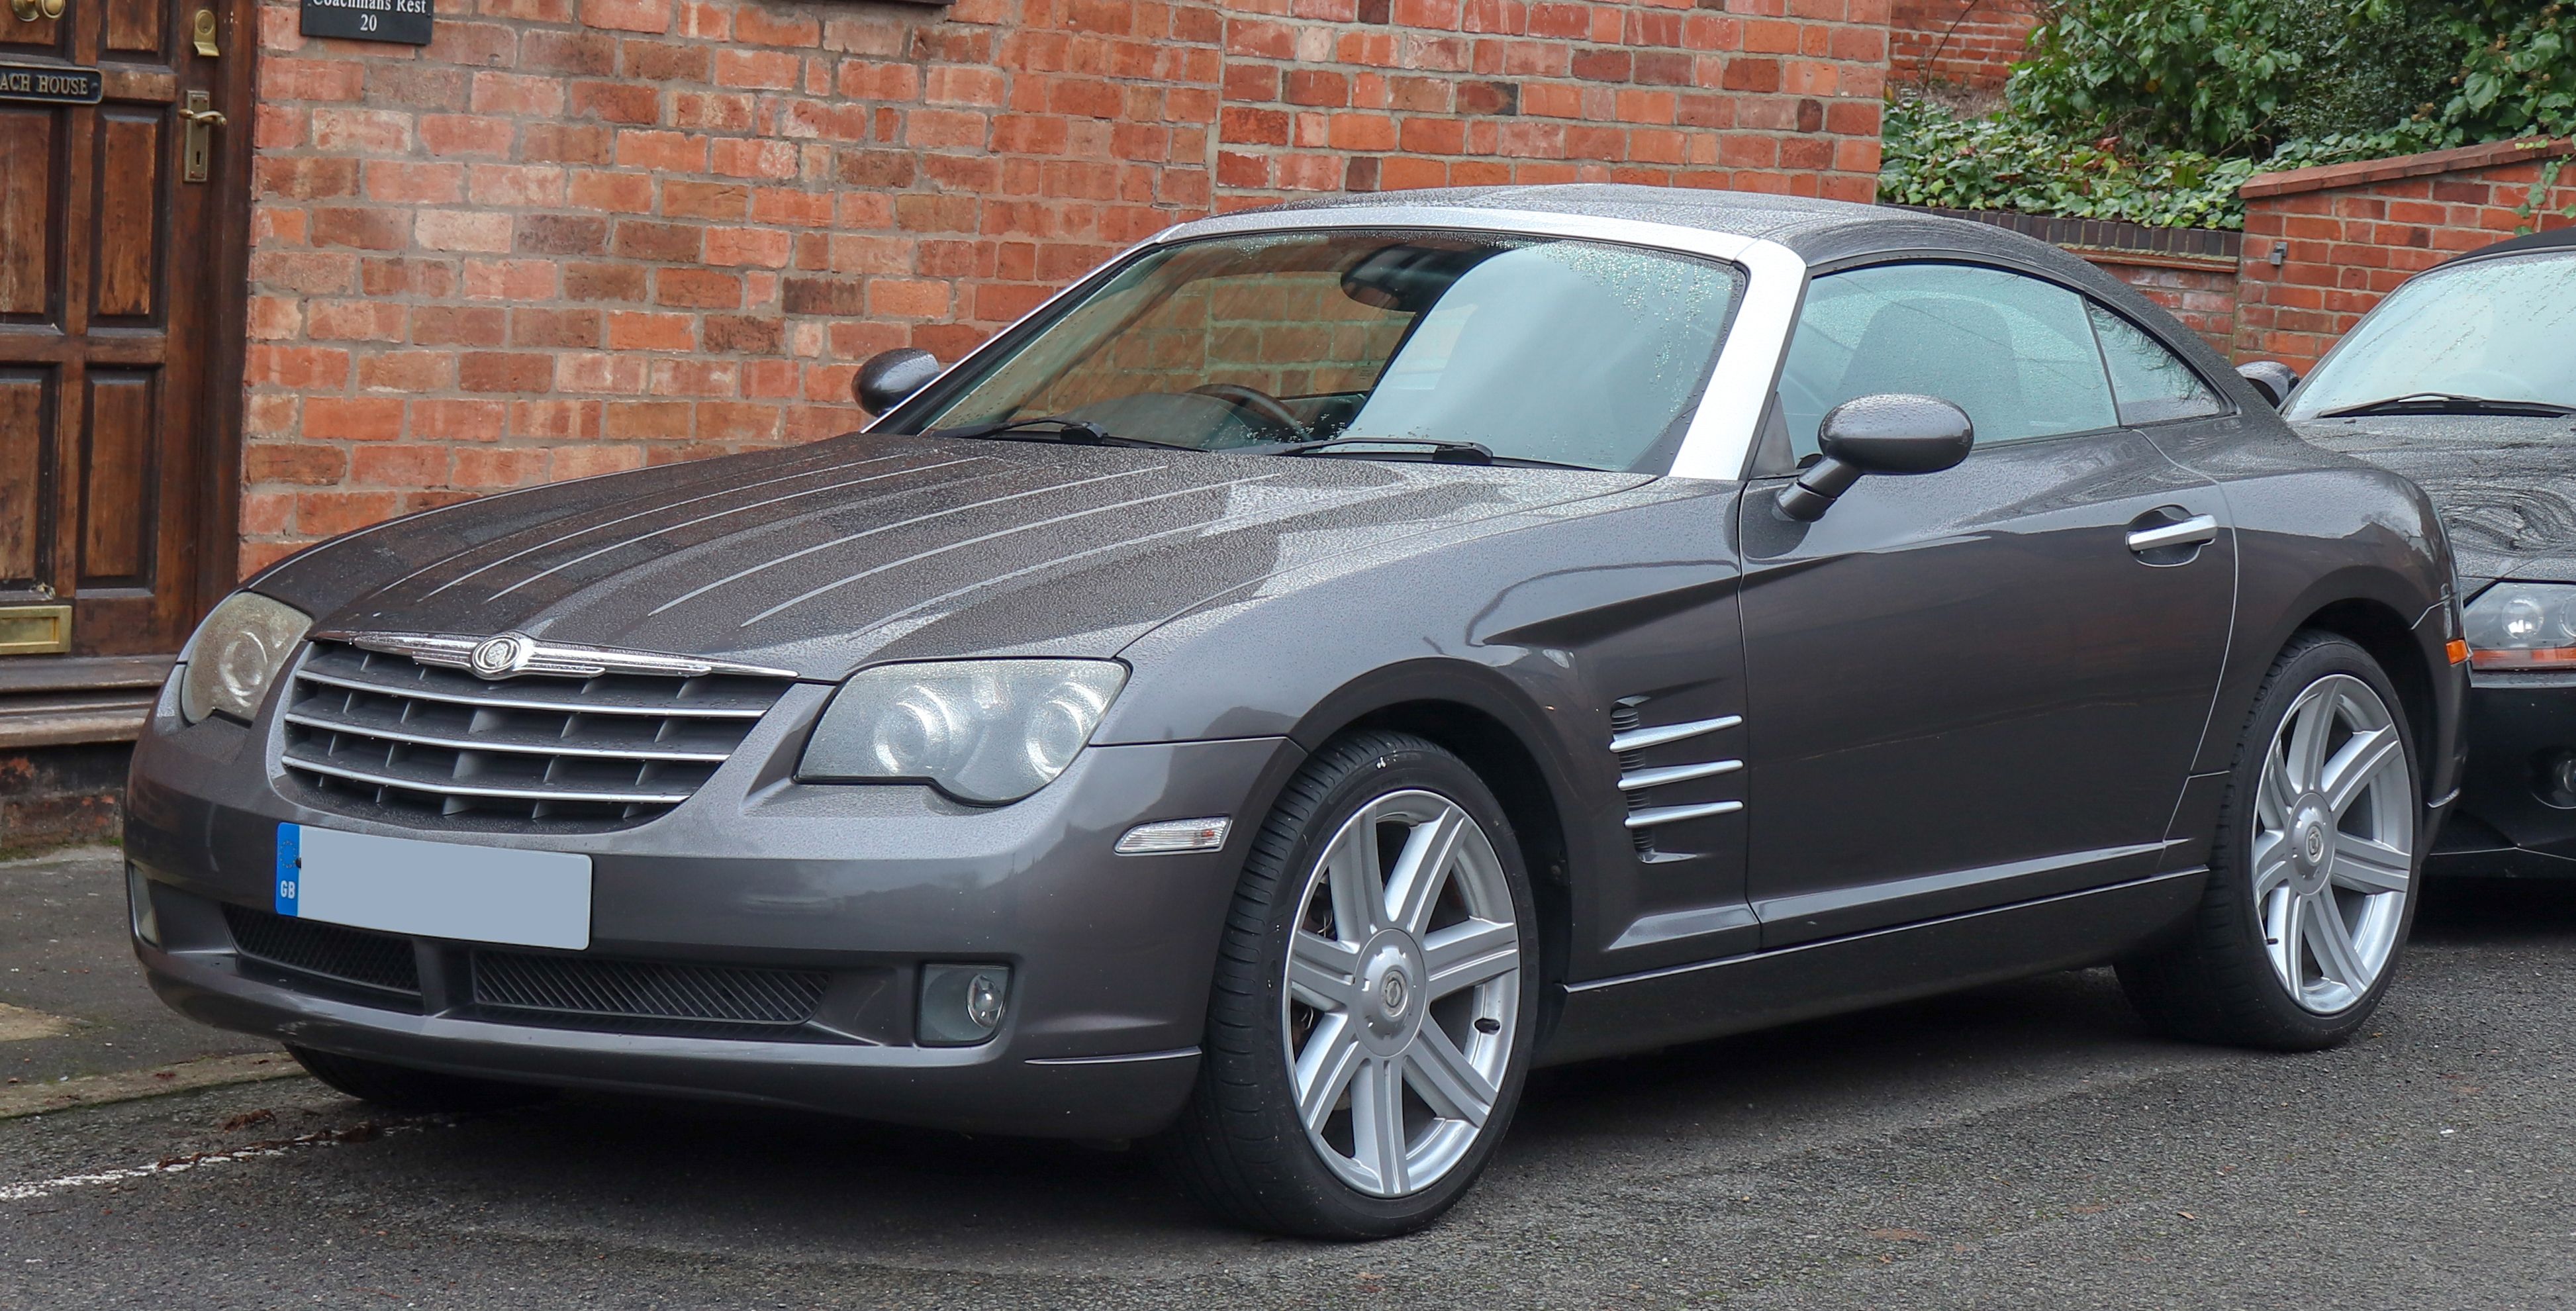 The 2004 Chrysler Crossfire parked on the street.